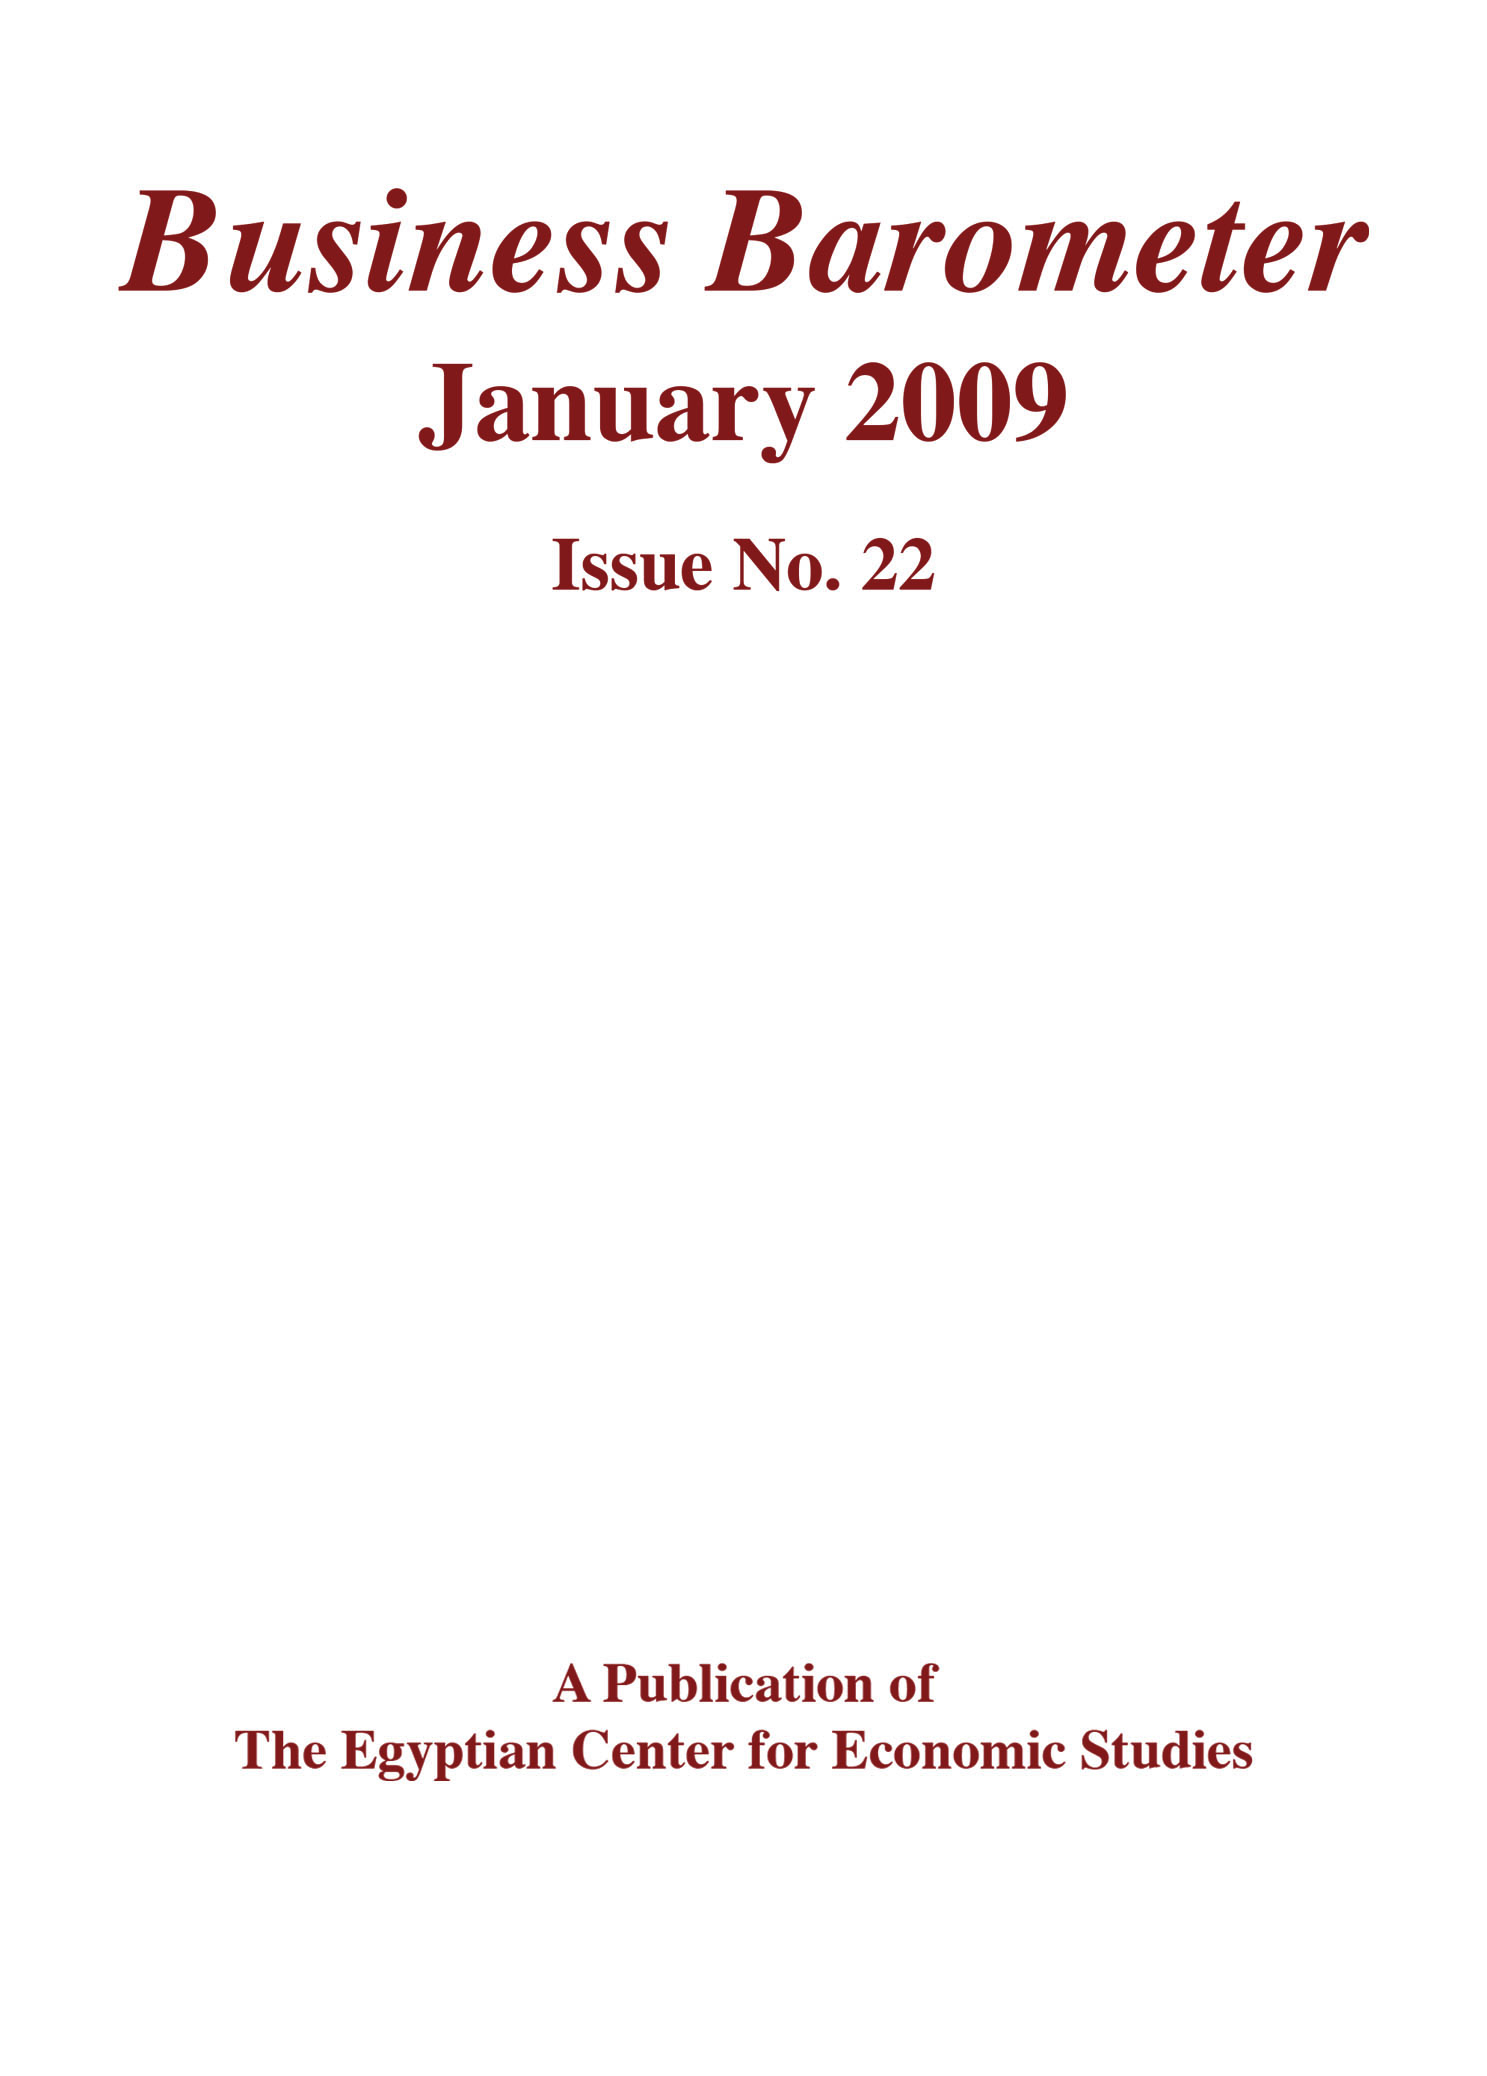 Issue 22 (July – December 2008)